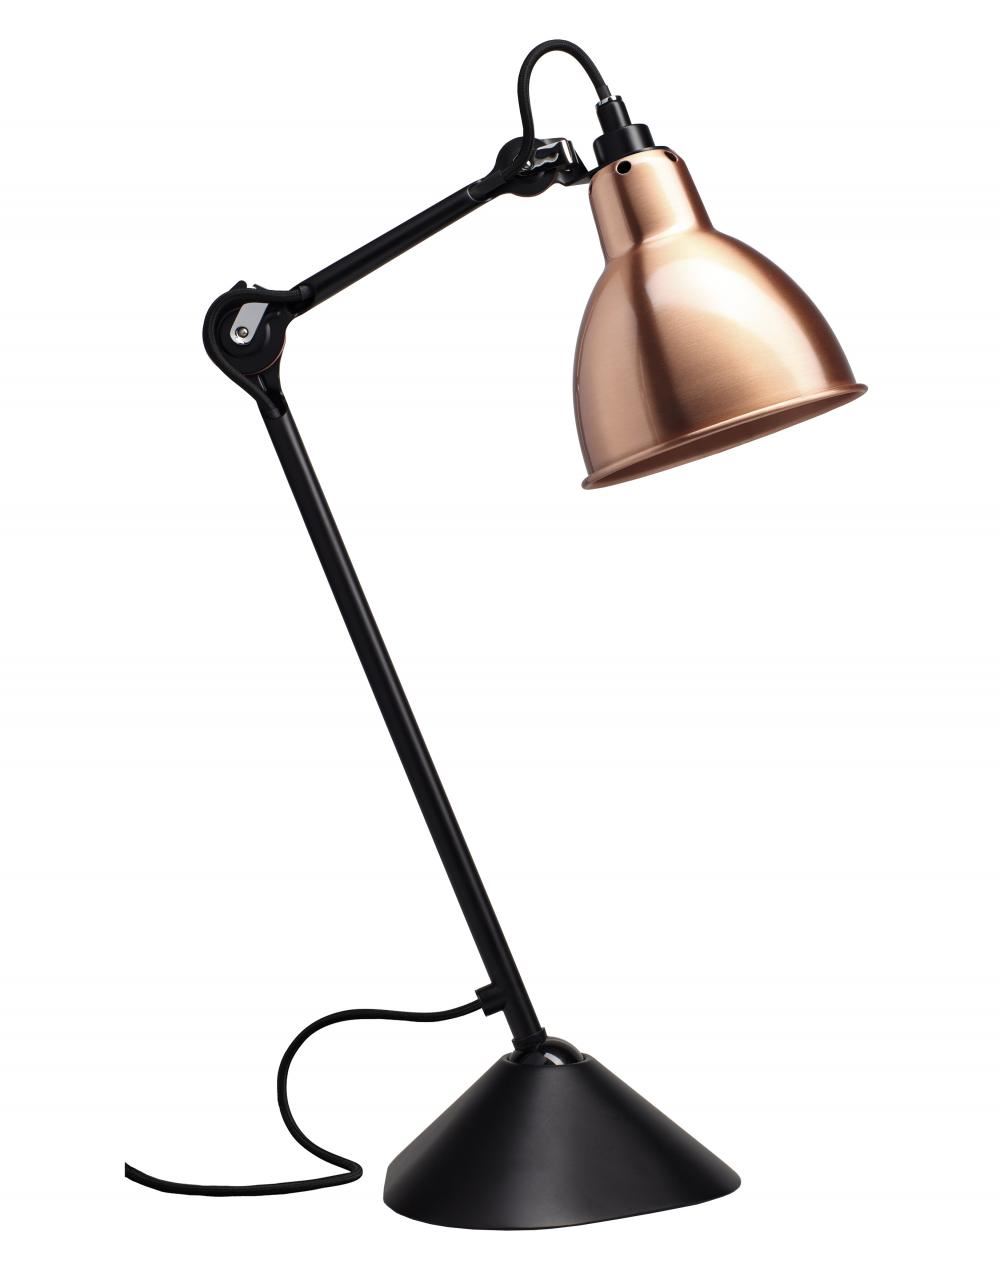 Lampe Gras 205 Table Lamp Satin Black Arm Copper Shade With White Interior Round